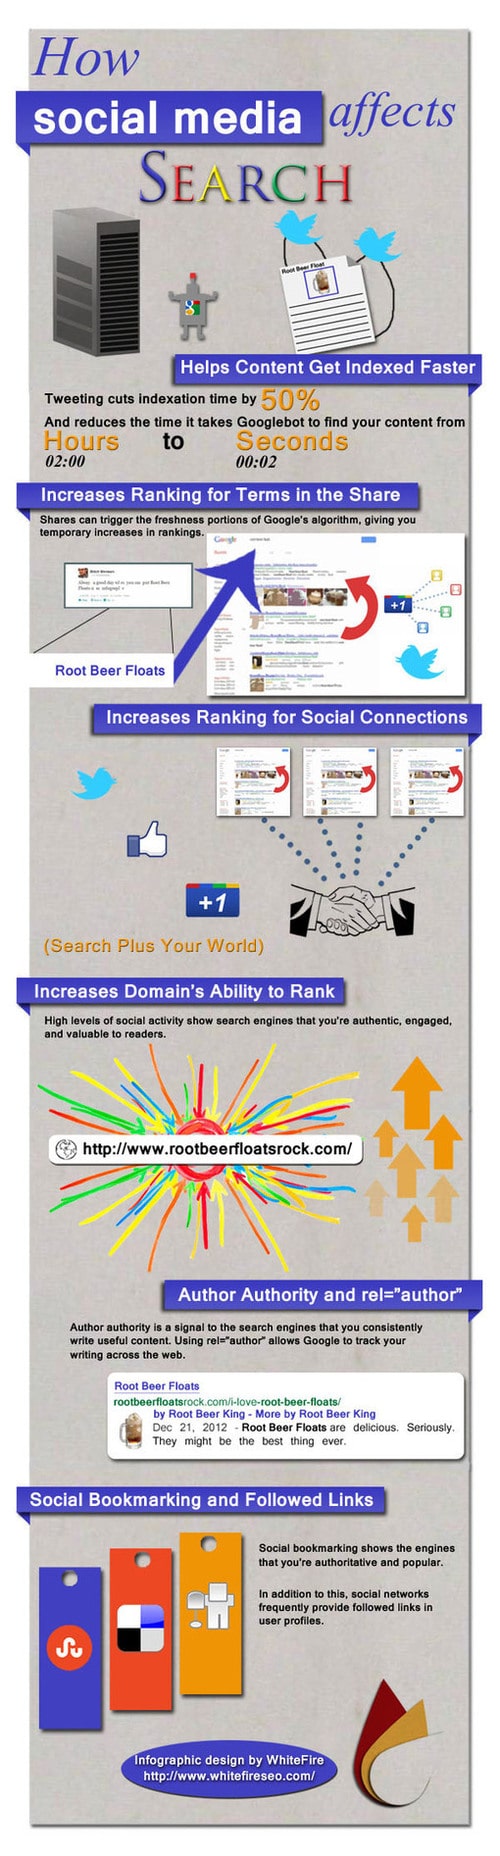 How Your Social Media Efforts Affect Search Ranking [Infographic]